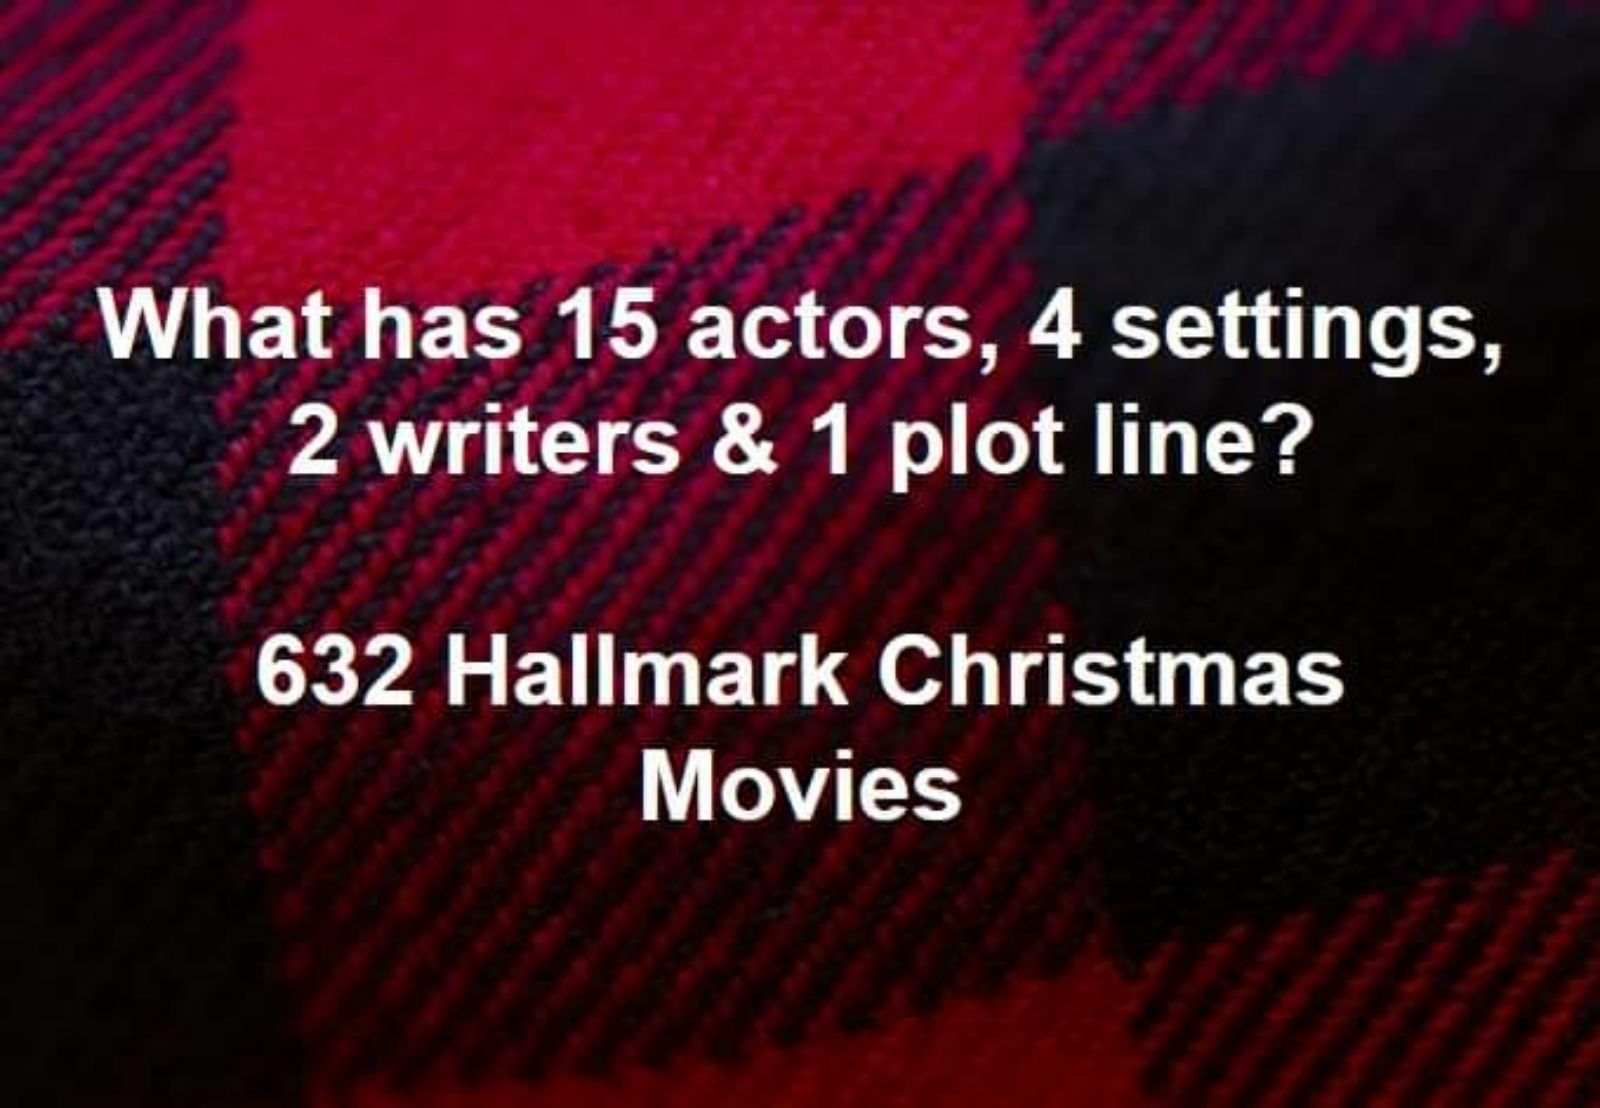 hastings funds management - What has 15 actors, 4 settings, 2 writers & 1 plot line? 632 Hallmark Christmas Movies